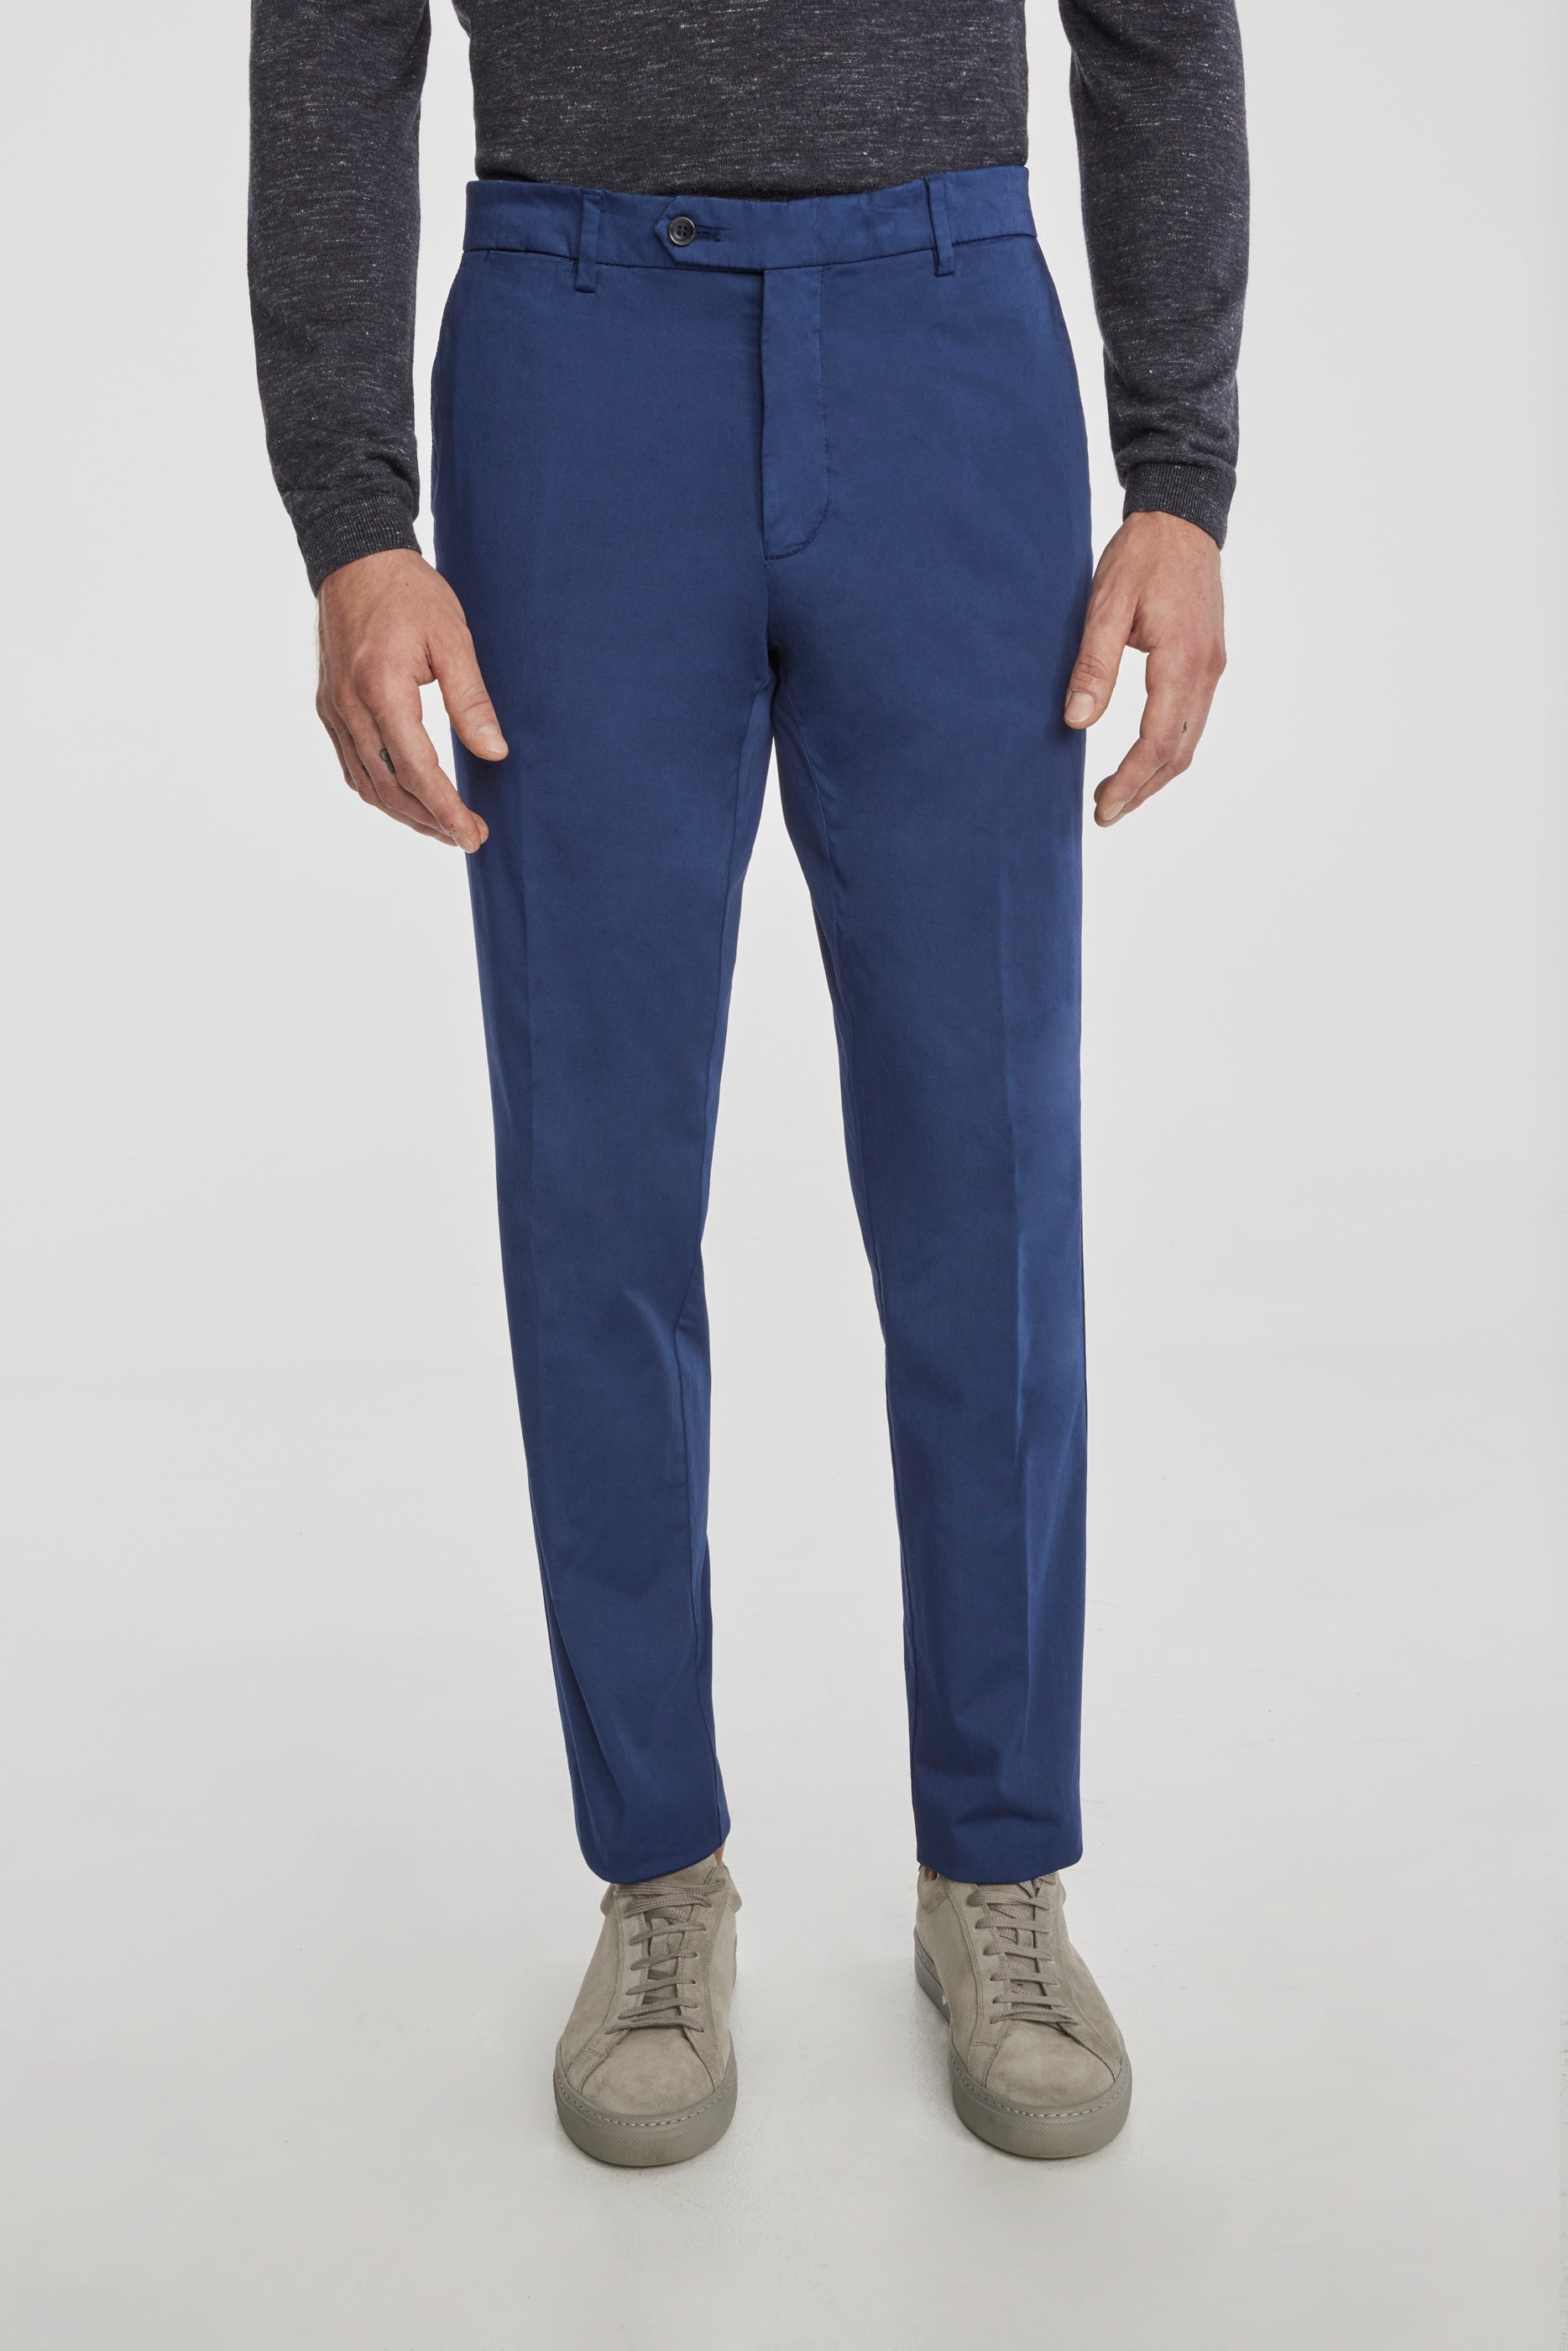 Alt view Jace Cotton Stretch Chino in Royal Blue